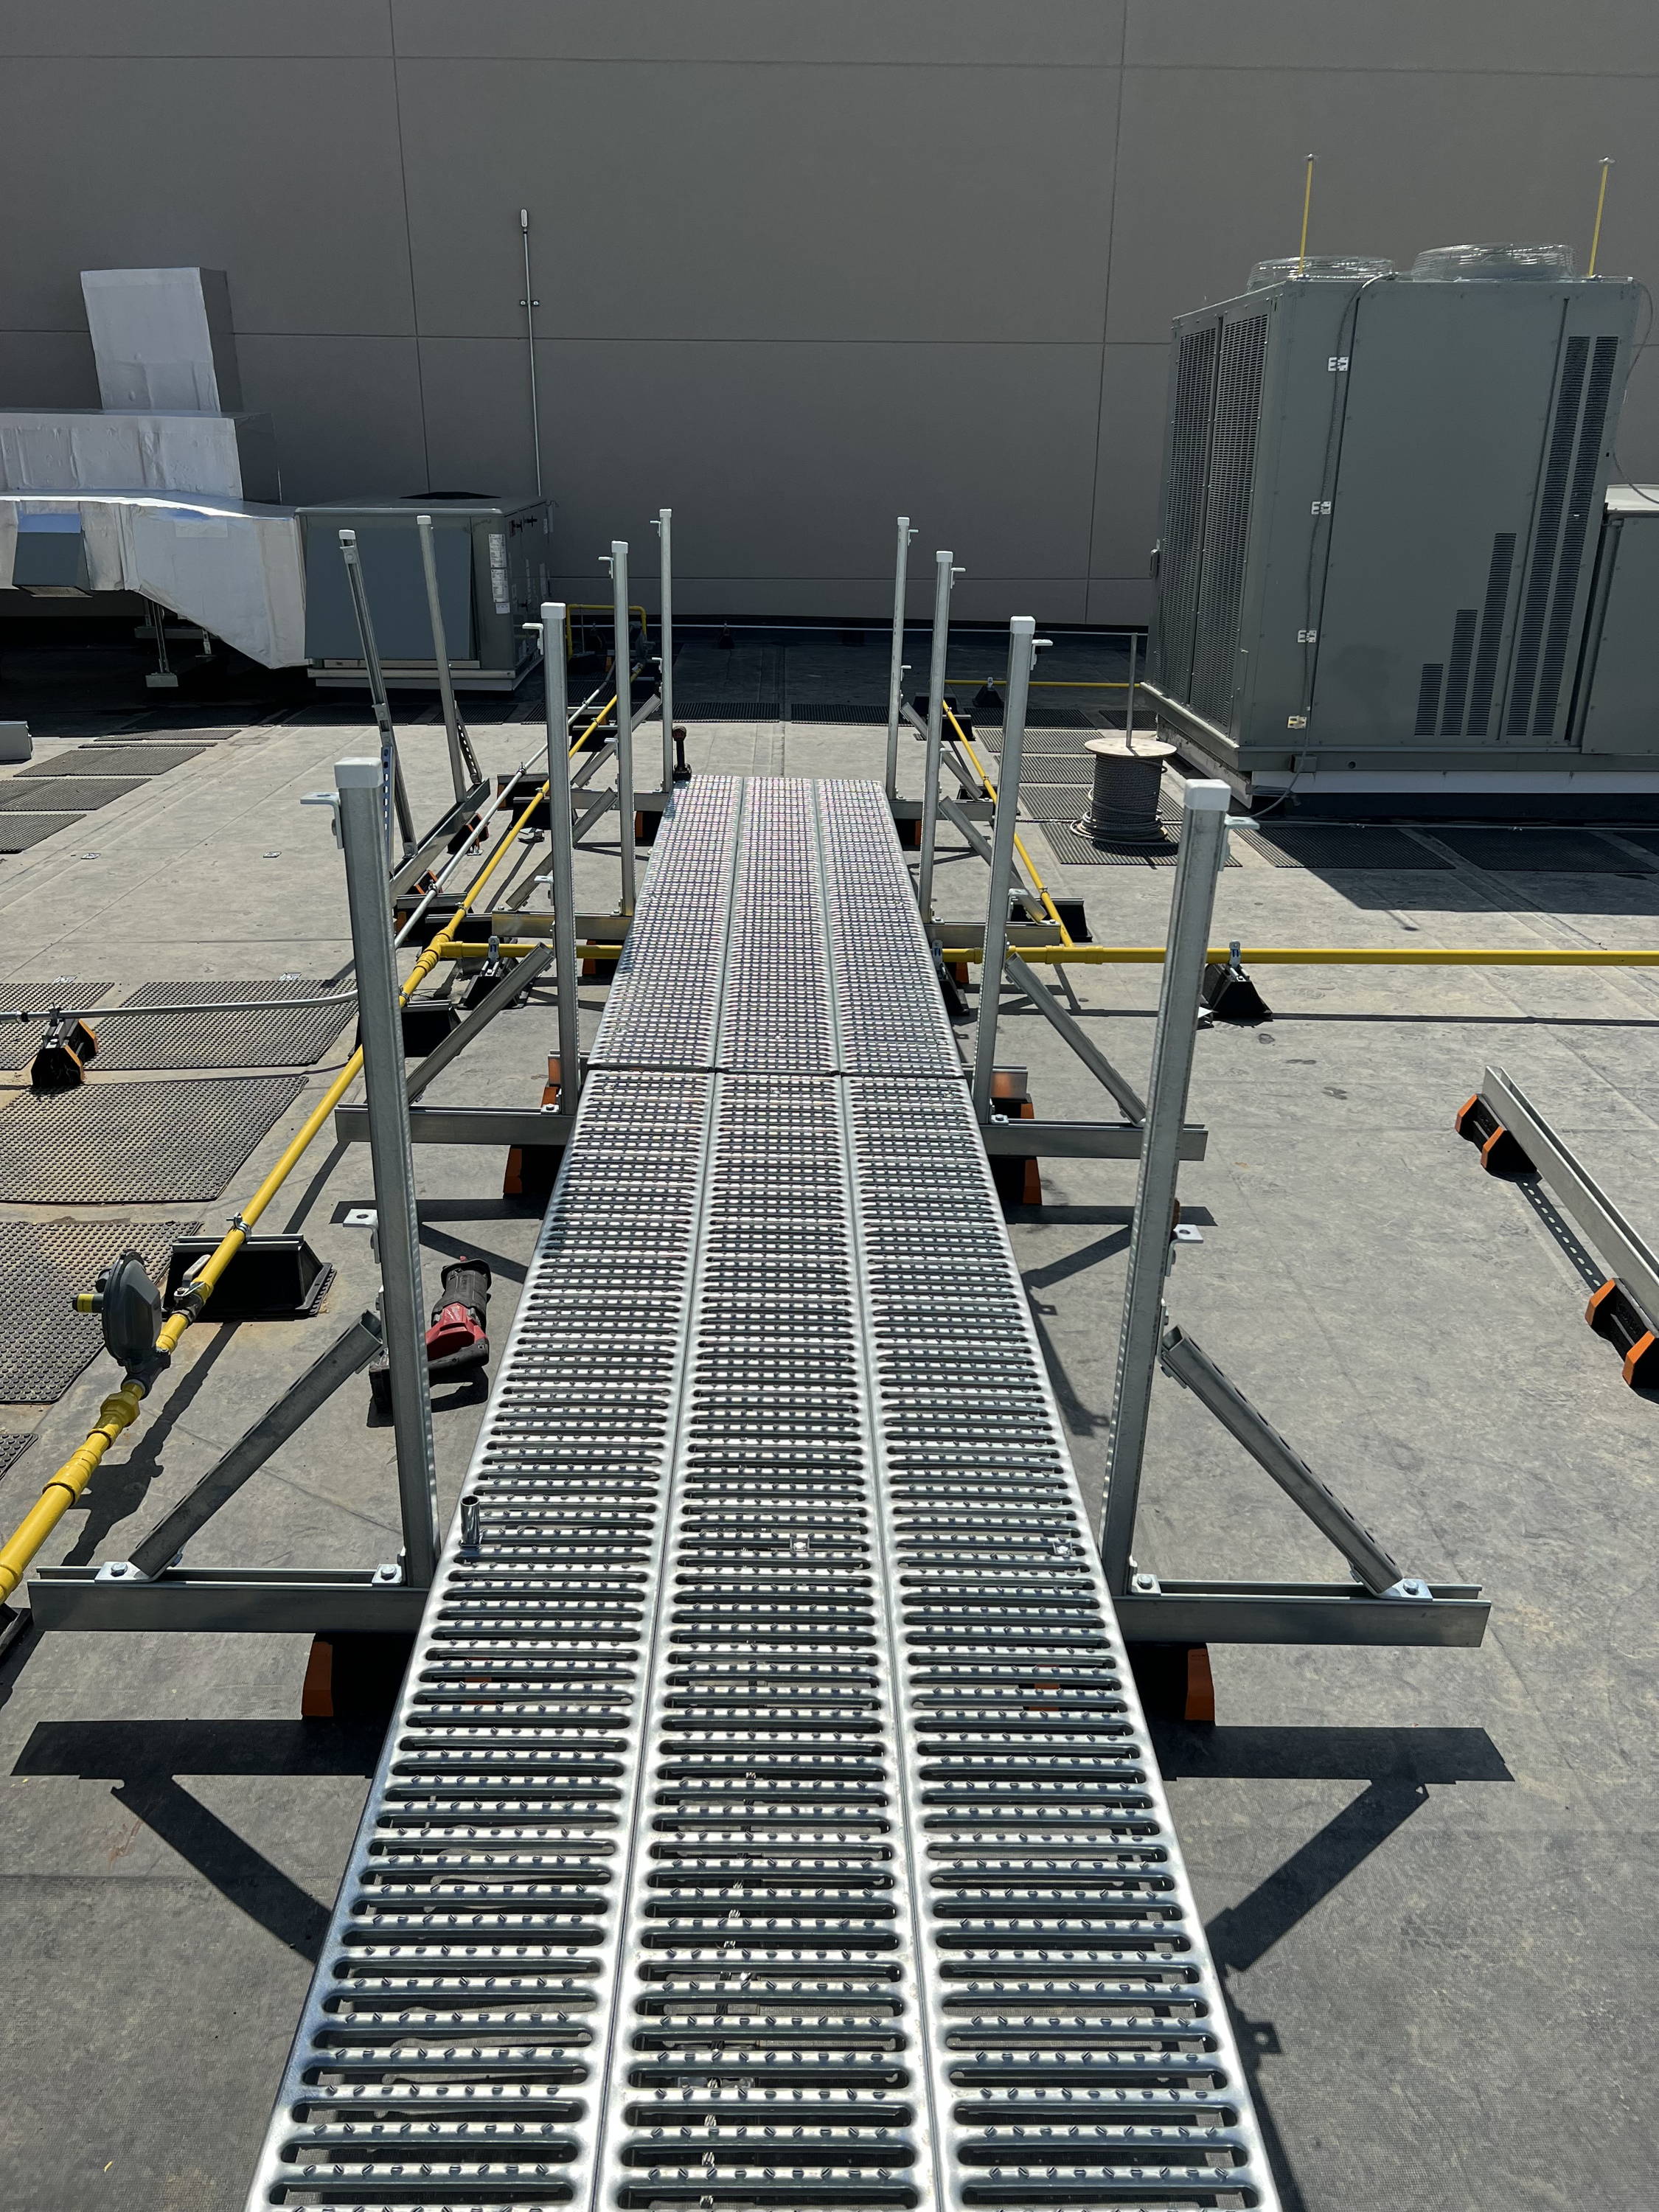 unistrut roofwalk under construction with prefabricated components